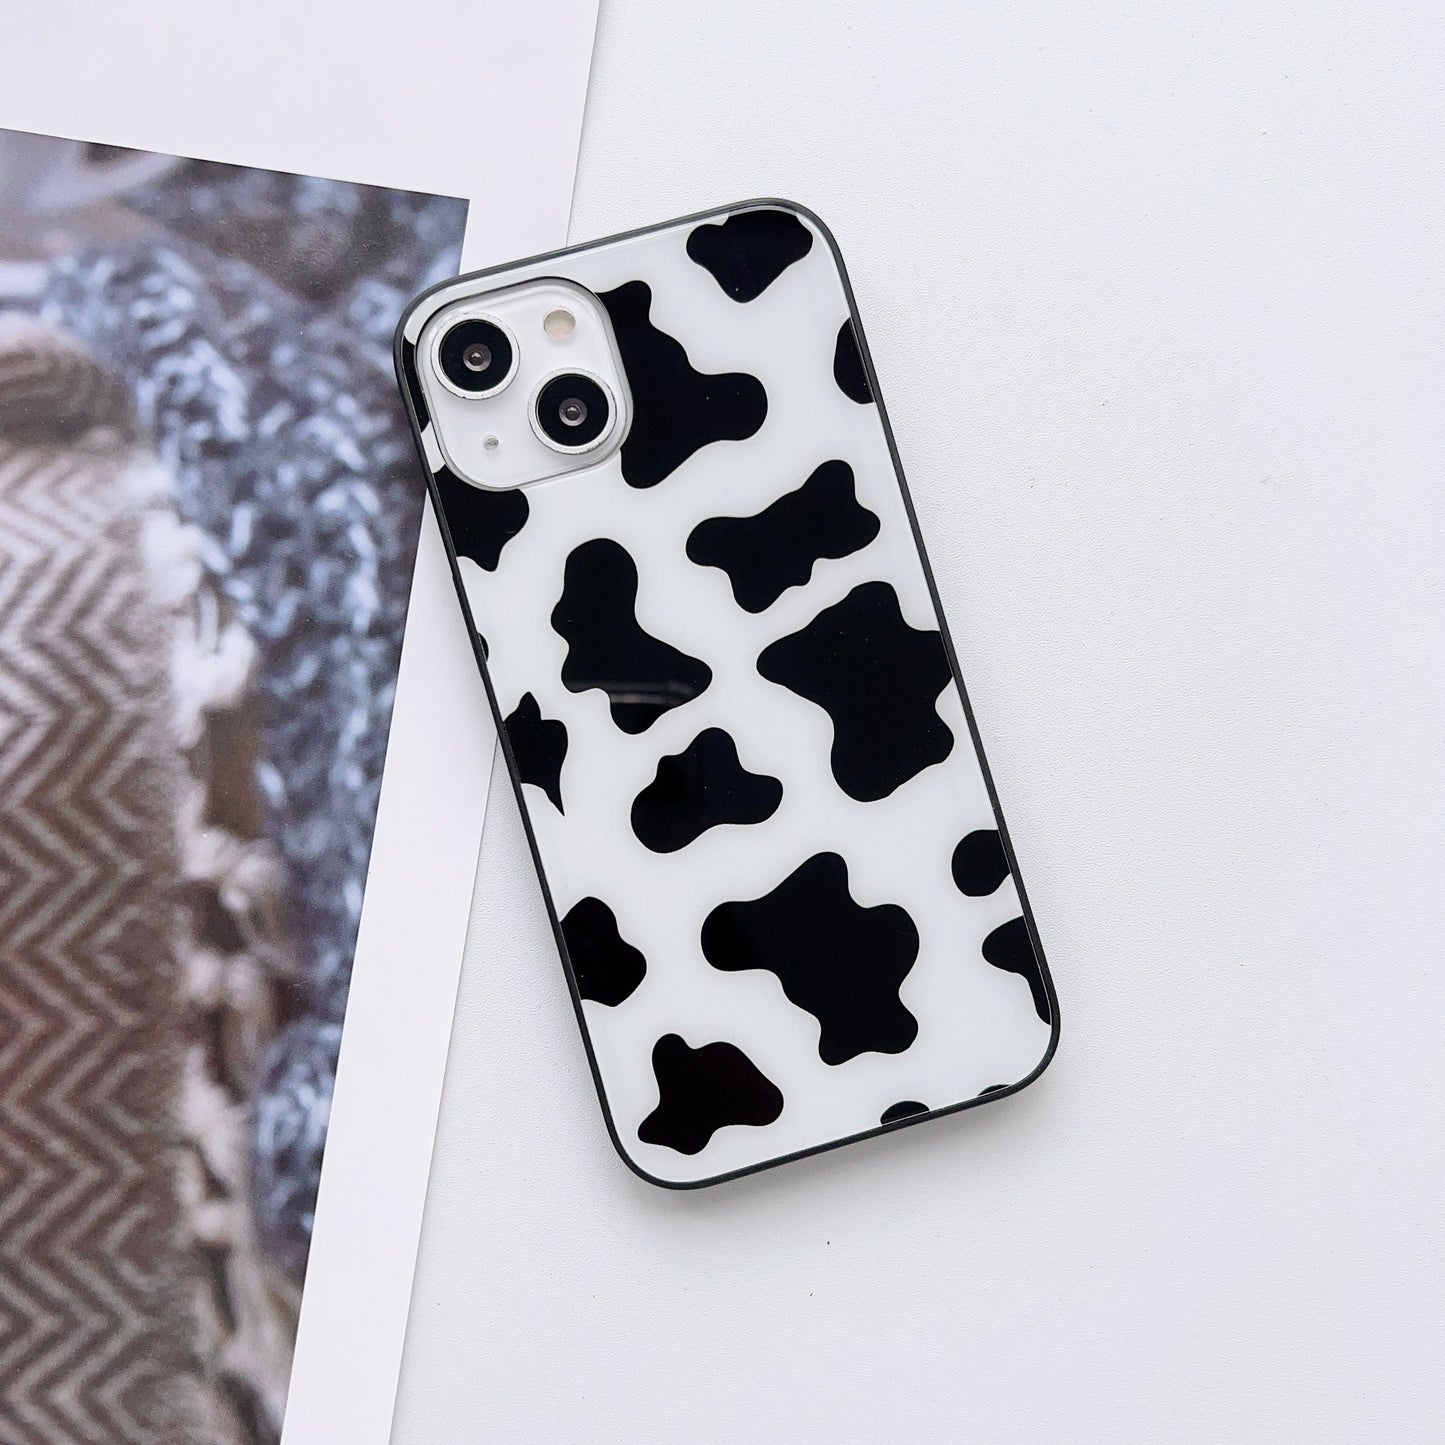 Moo Moo Pattern Glass Case Cover